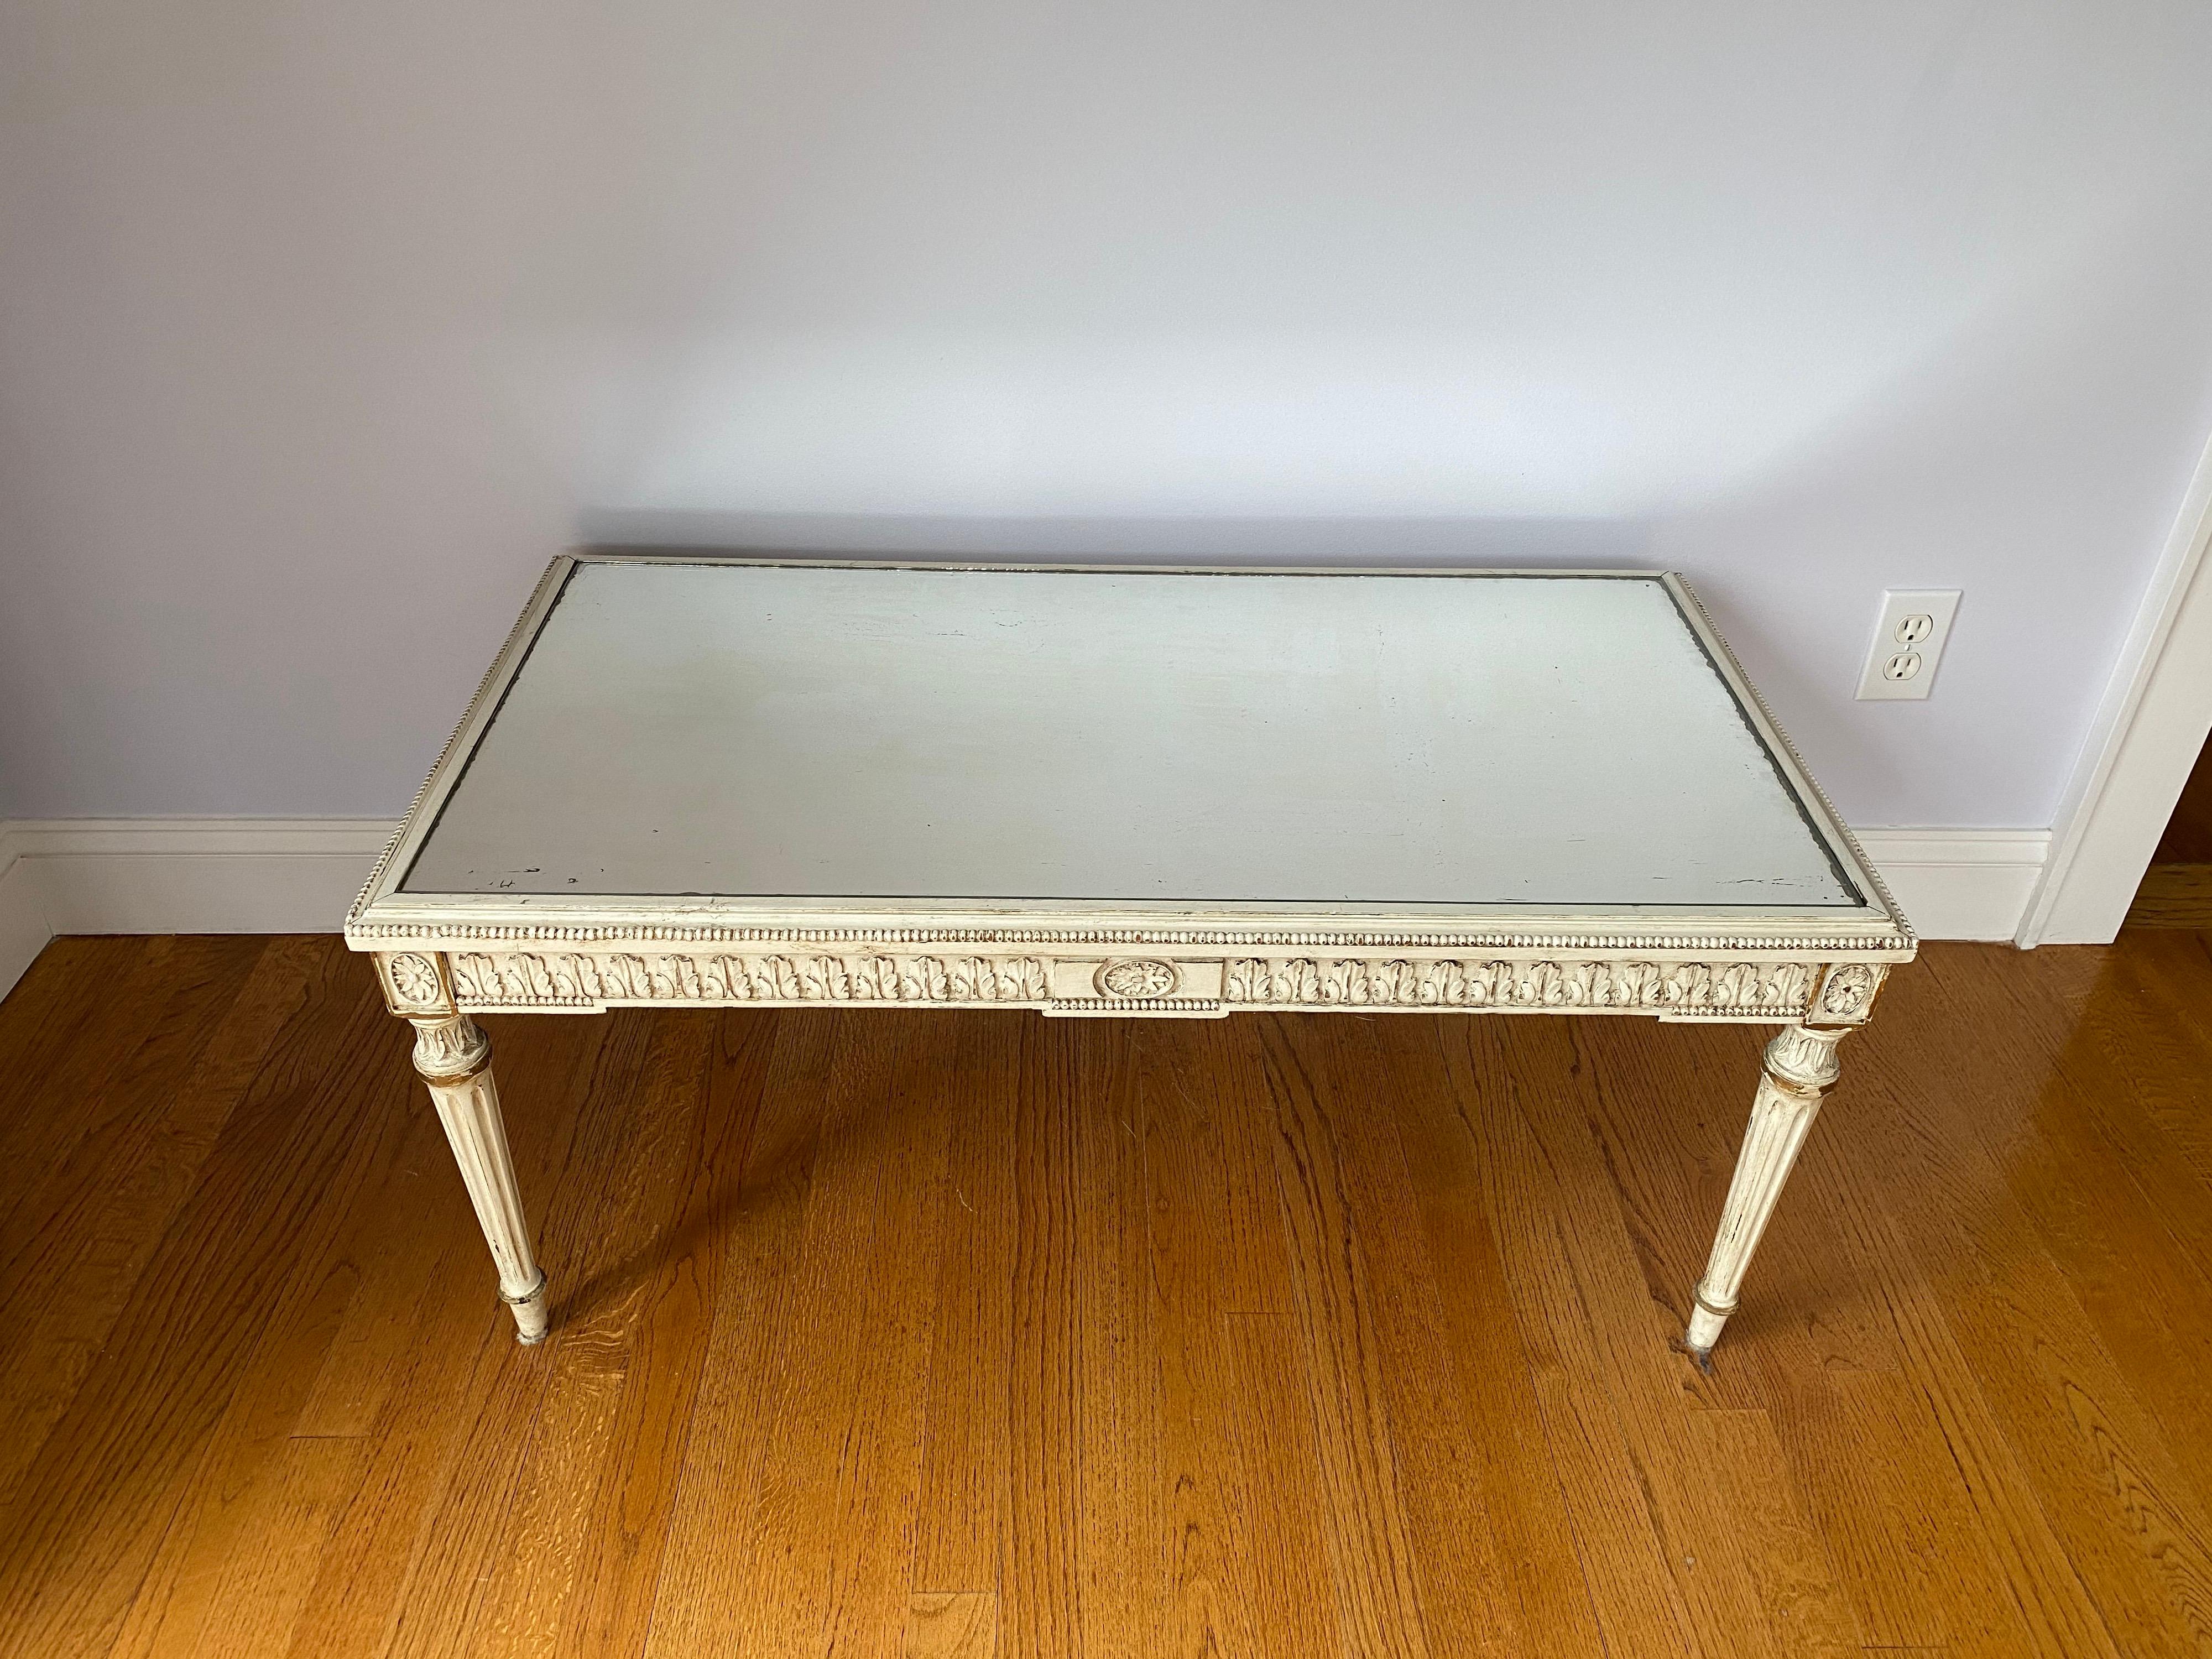 Louis XVI style mirrored coffee table, 20th century
Classic French design, great proportions
Squared Rosette, fluted, tapered legs and a frieze of acanthus leaf motifs and beaded around the edge.
Measures: 38 1/8